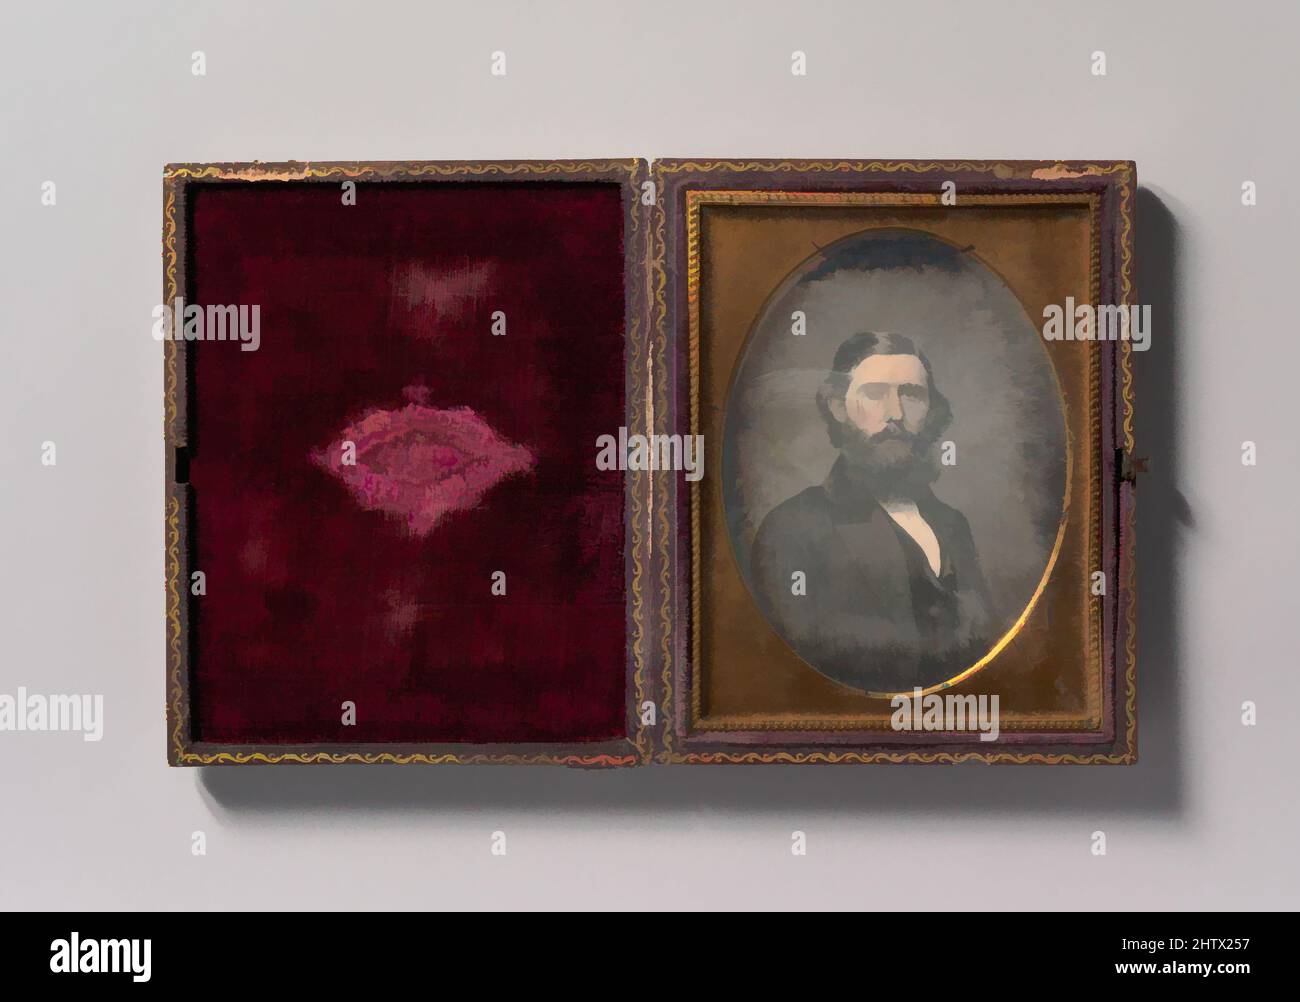 Art inspired by Bearded Man, 1853–57, Daguerreotype, Image: 9.2 x 6.8 cm (3 5/8 x 2 11/16 in.), Photographs, Classic works modernized by Artotop with a splash of modernity. Shapes, color and value, eye-catching visual impact on art. Emotions through freedom of artworks in a contemporary way. A timeless message pursuing a wildly creative new direction. Artists turning to the digital medium and creating the Artotop NFT Stock Photo